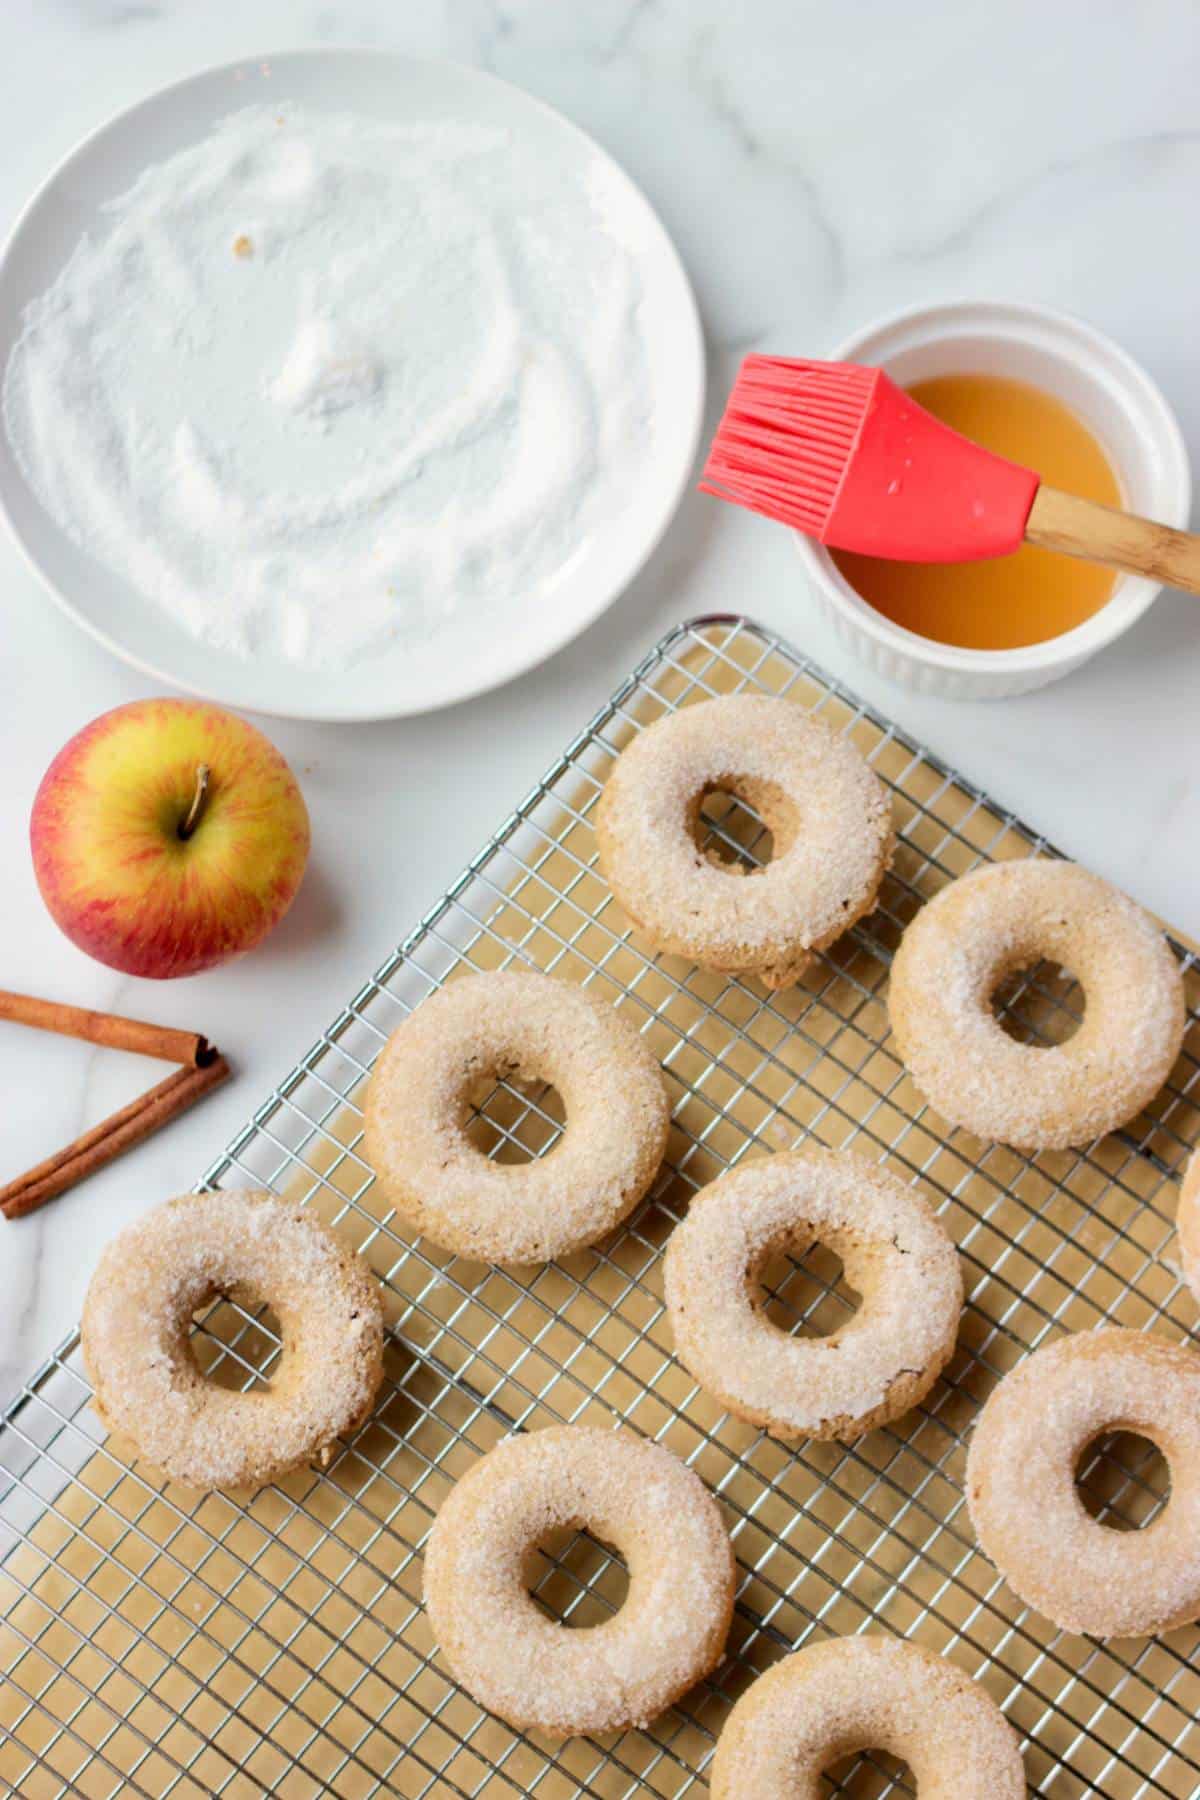 Baked apple cider donuts on a wire rack with sugar coating. Background shows the bowl of sugar and apple cider for sugar coating process along with an apple and 2 cinnamon sticks.